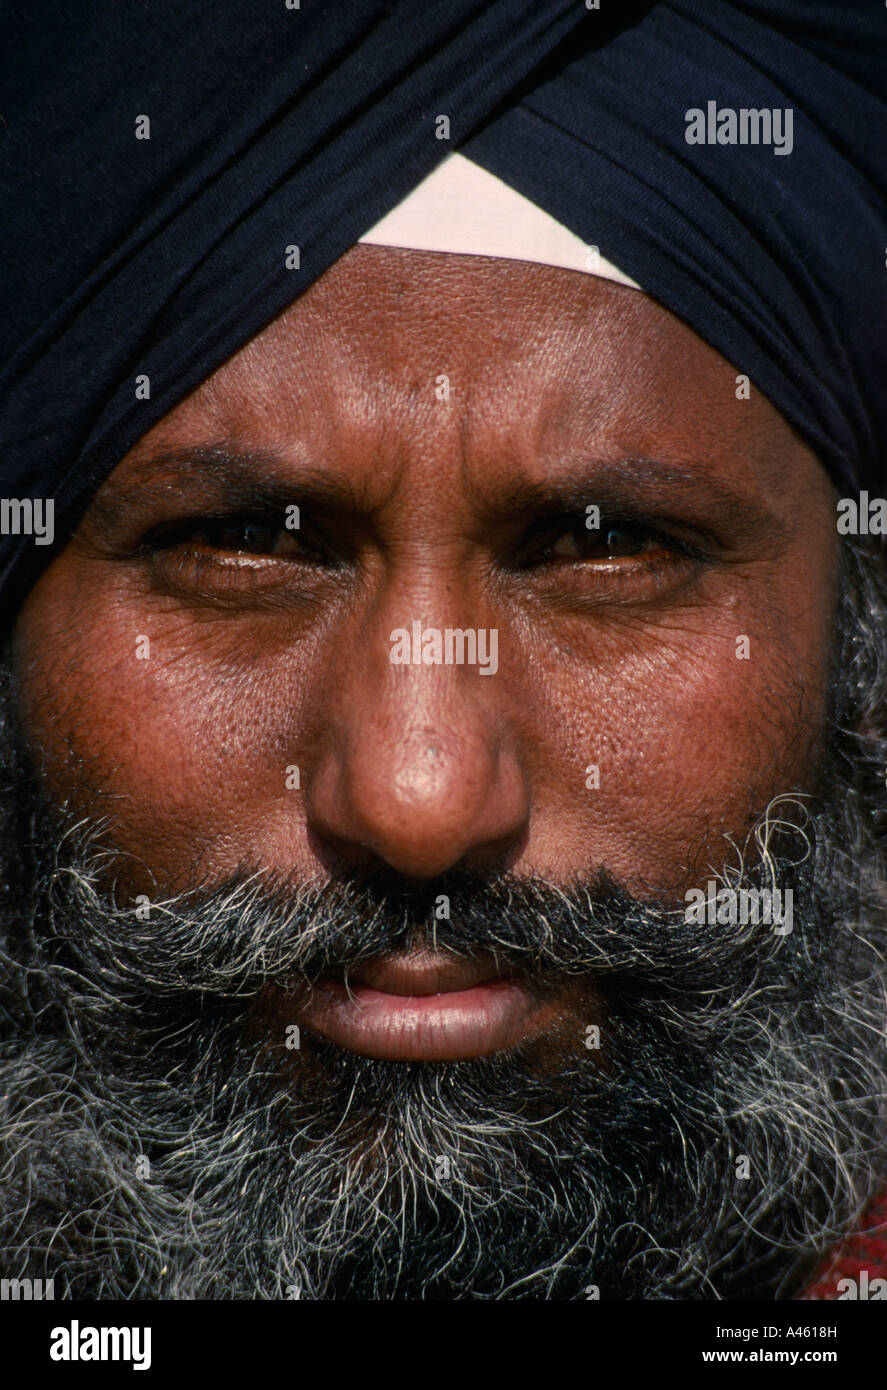 INDIA <b>South Asia</b> Punjab People Portrait Sikh Man with grey beard and black ... - india-south-asia-punjab-people-portrait-sikh-man-with-grey-beard-and-A4618H